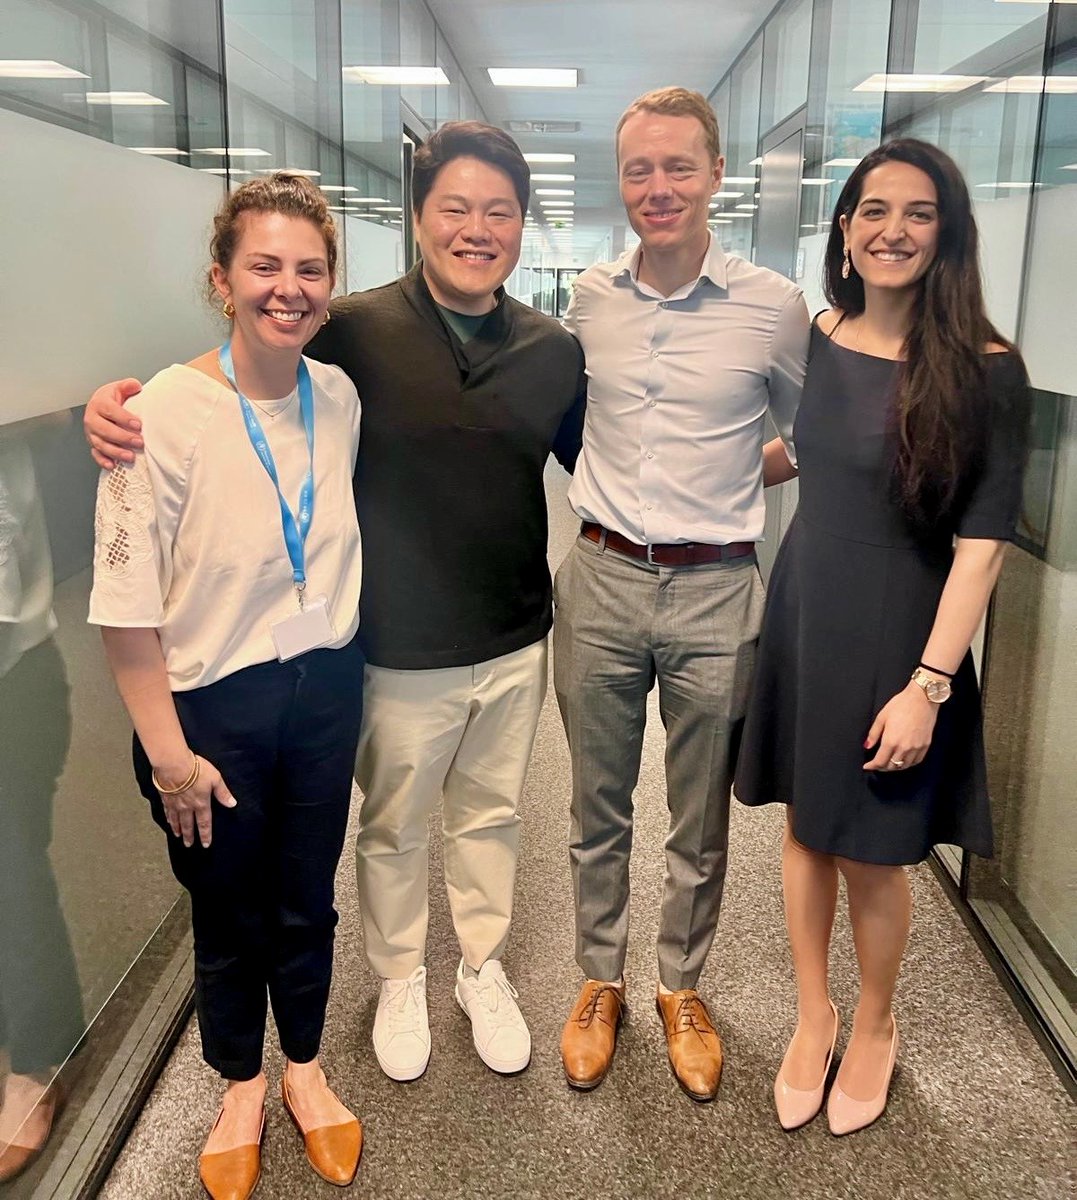 Every teacher/mentor lives for these moments! 4 of my former grad students from @mcgillu, all leaders now, and working with @WHO this week, on guidelines for TB So darned proud! Alice Zwerling, Hojoon Sohn, @sgschumacher & @MikashmiKohli